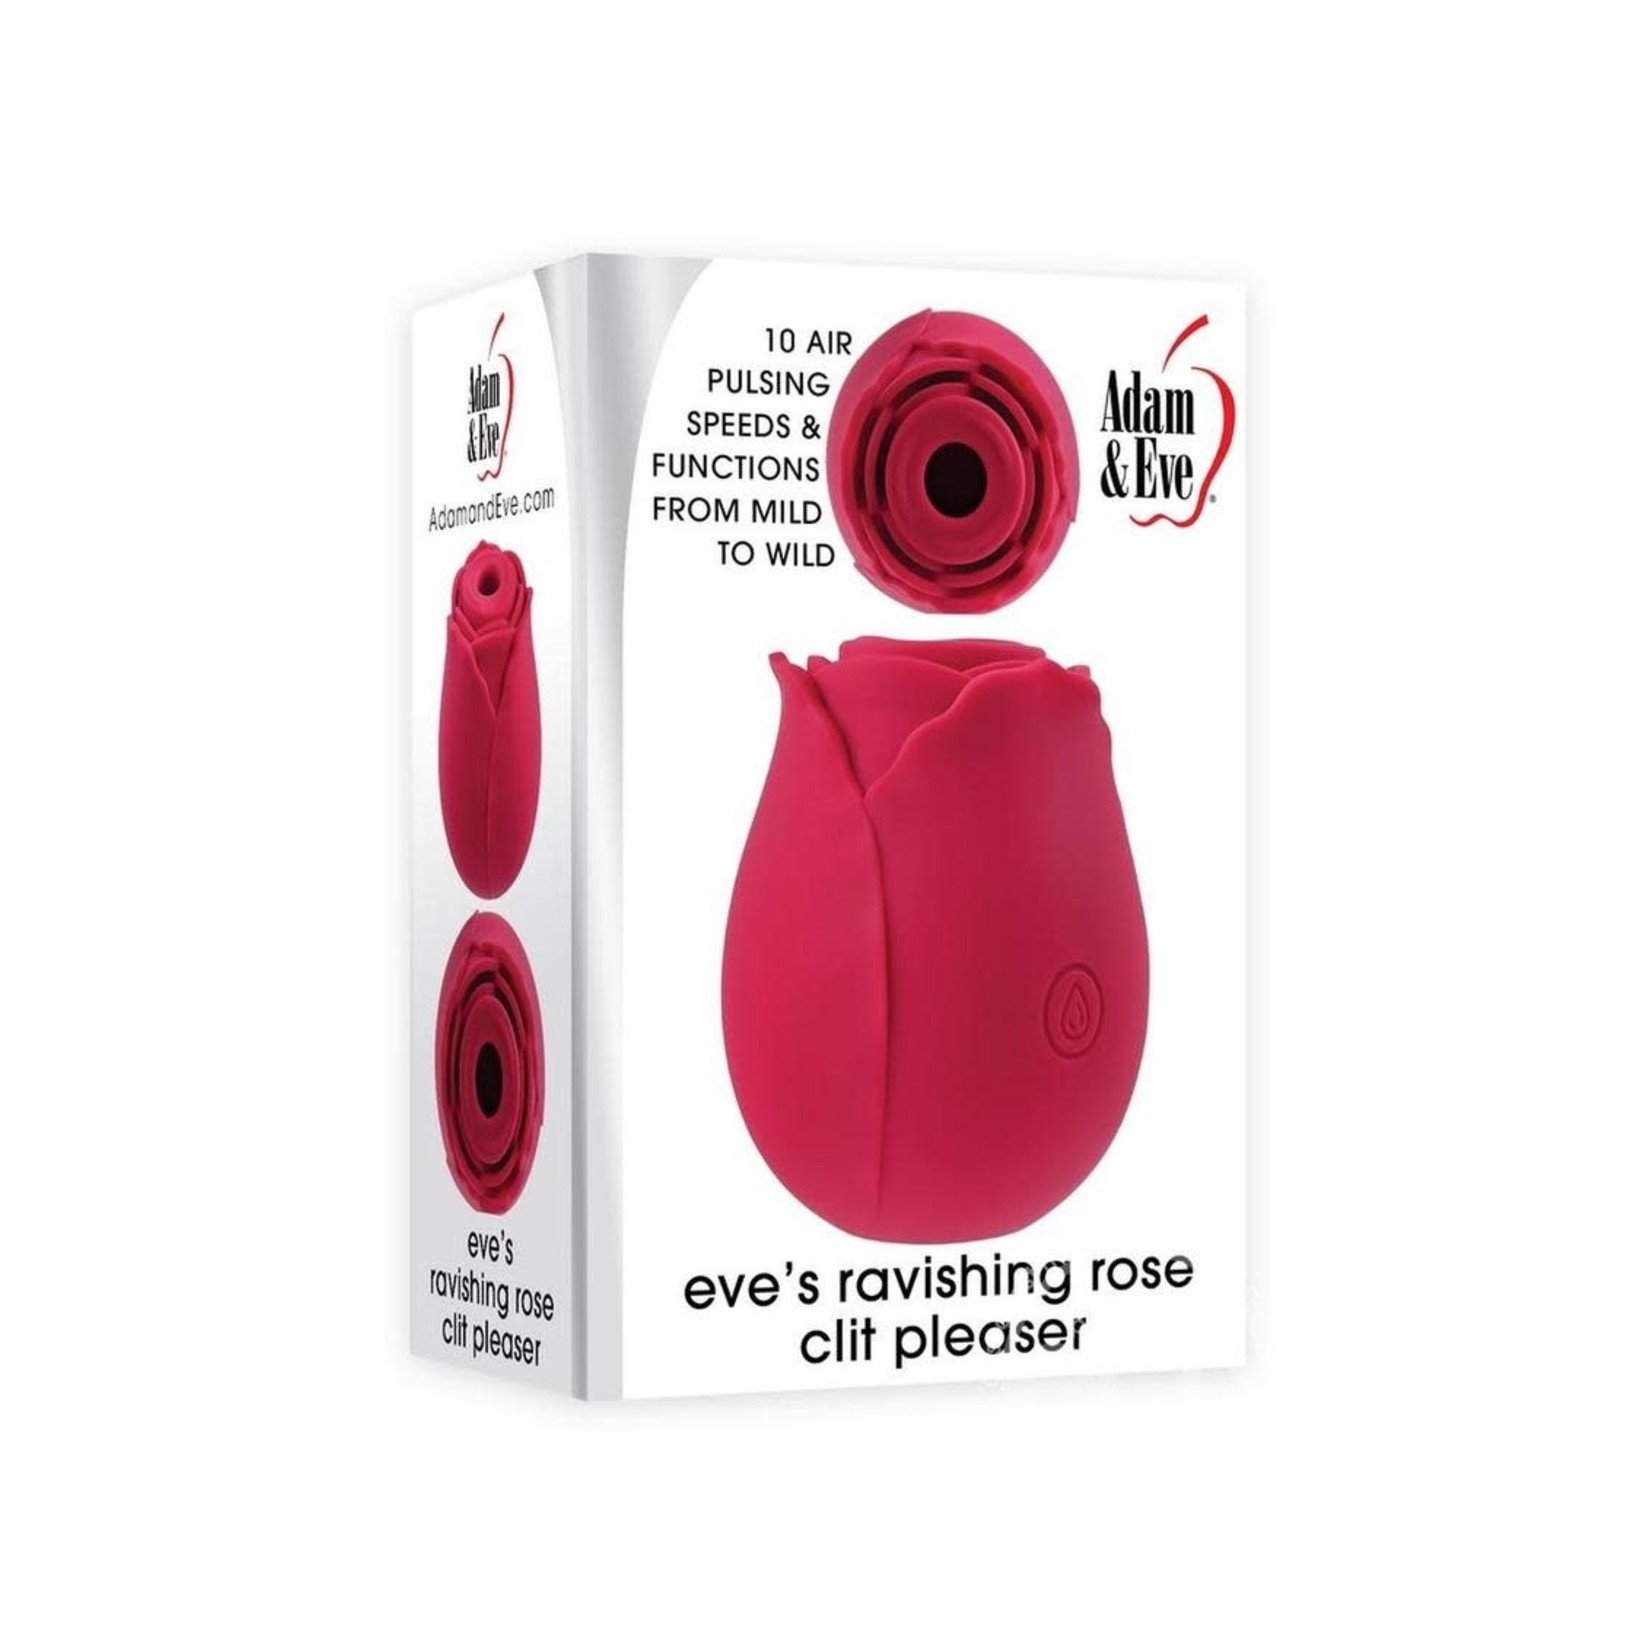 Adam & Eve's Ravishing Rose Clit Pleaser Silicone Rechargeable Stimulator - Red